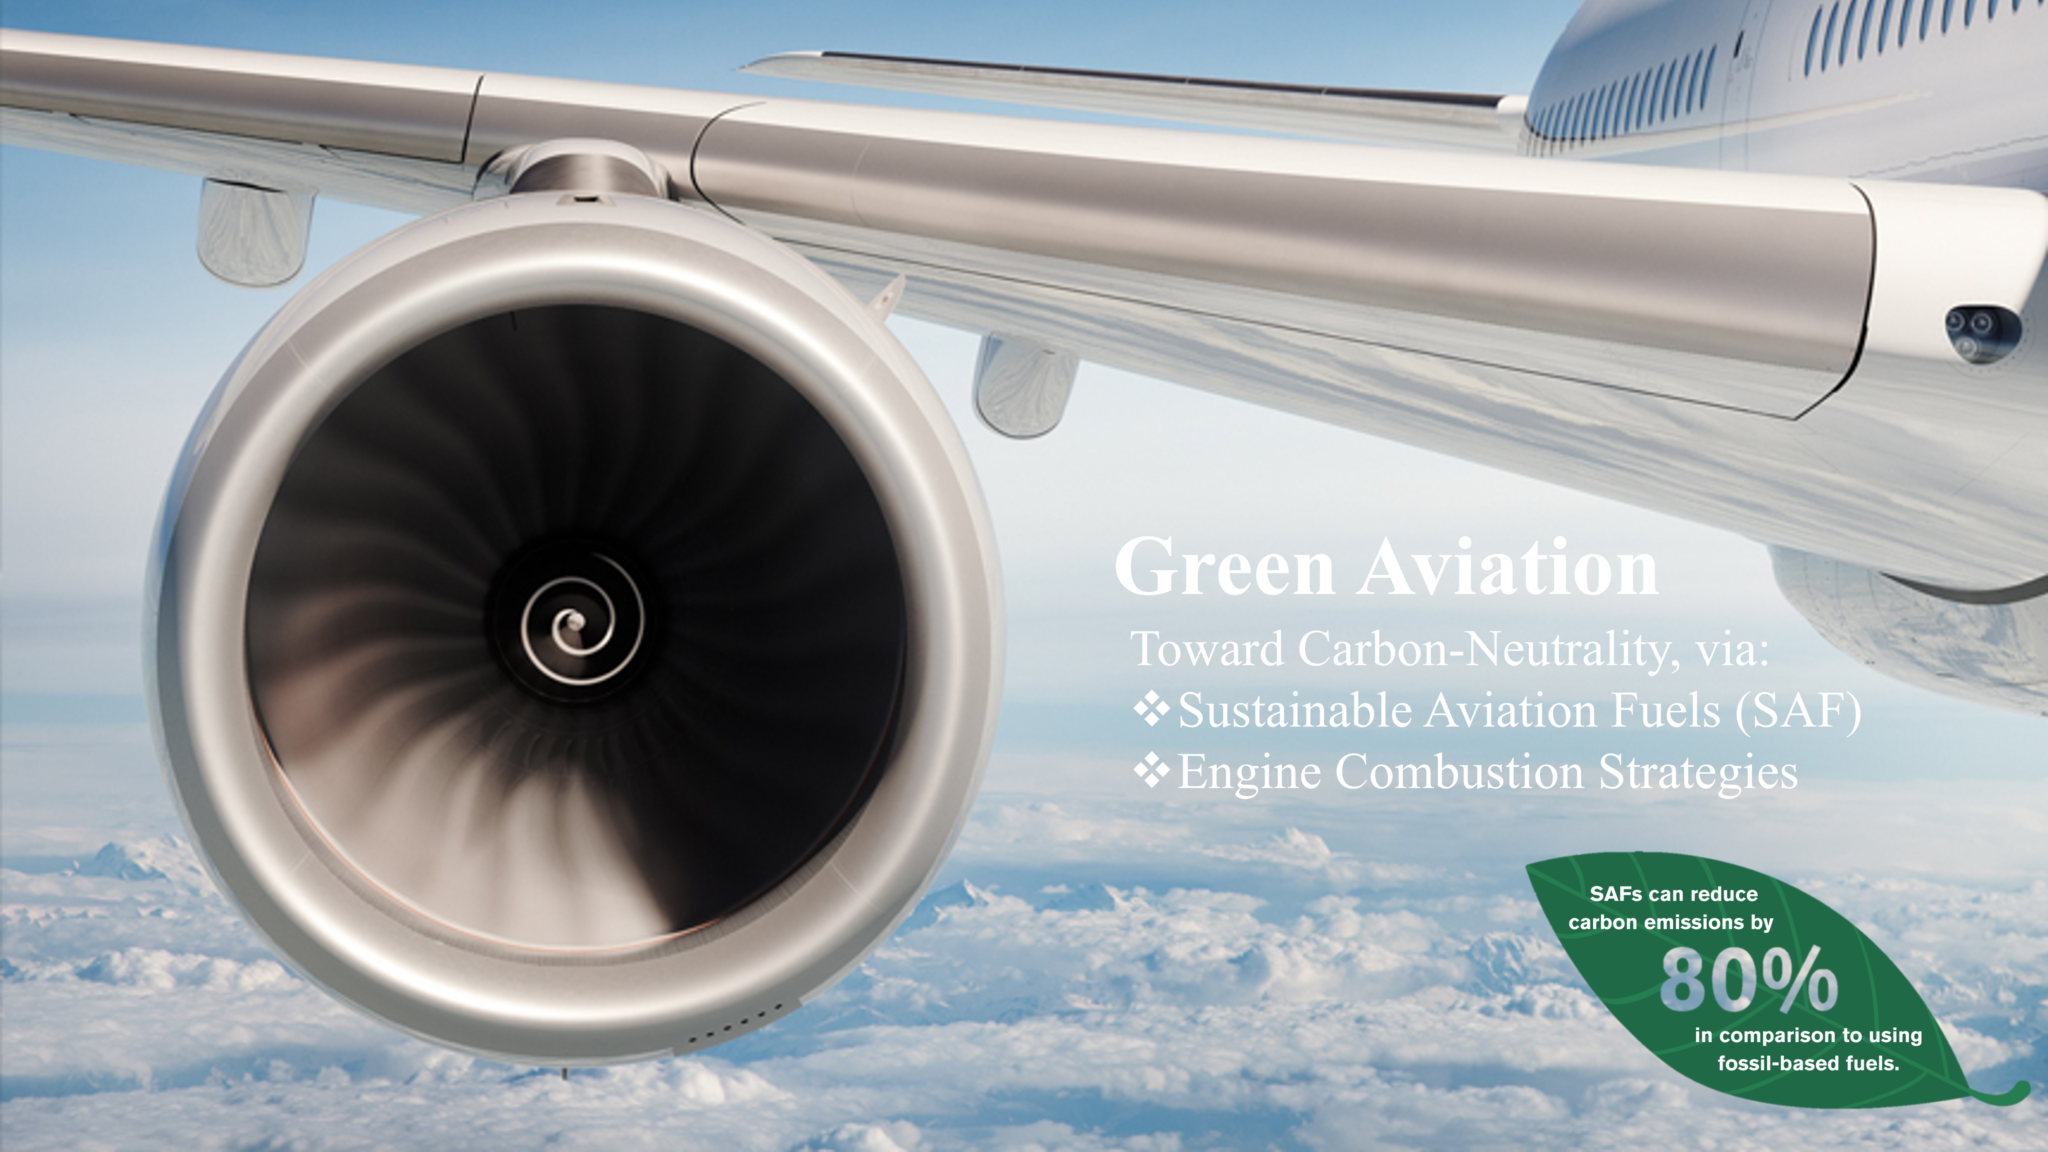 A major focus of UHPC-lab is to attack the bottleneck challenges hampering SAF implementation in air transportation, so as to facilitate green aviation and hence carbon neutraulity. Toward this, we focus on two important aspects that can bring instant carbon reduction across the entire aviation sector, namely SAF and SAF-based aeroengine technologies.